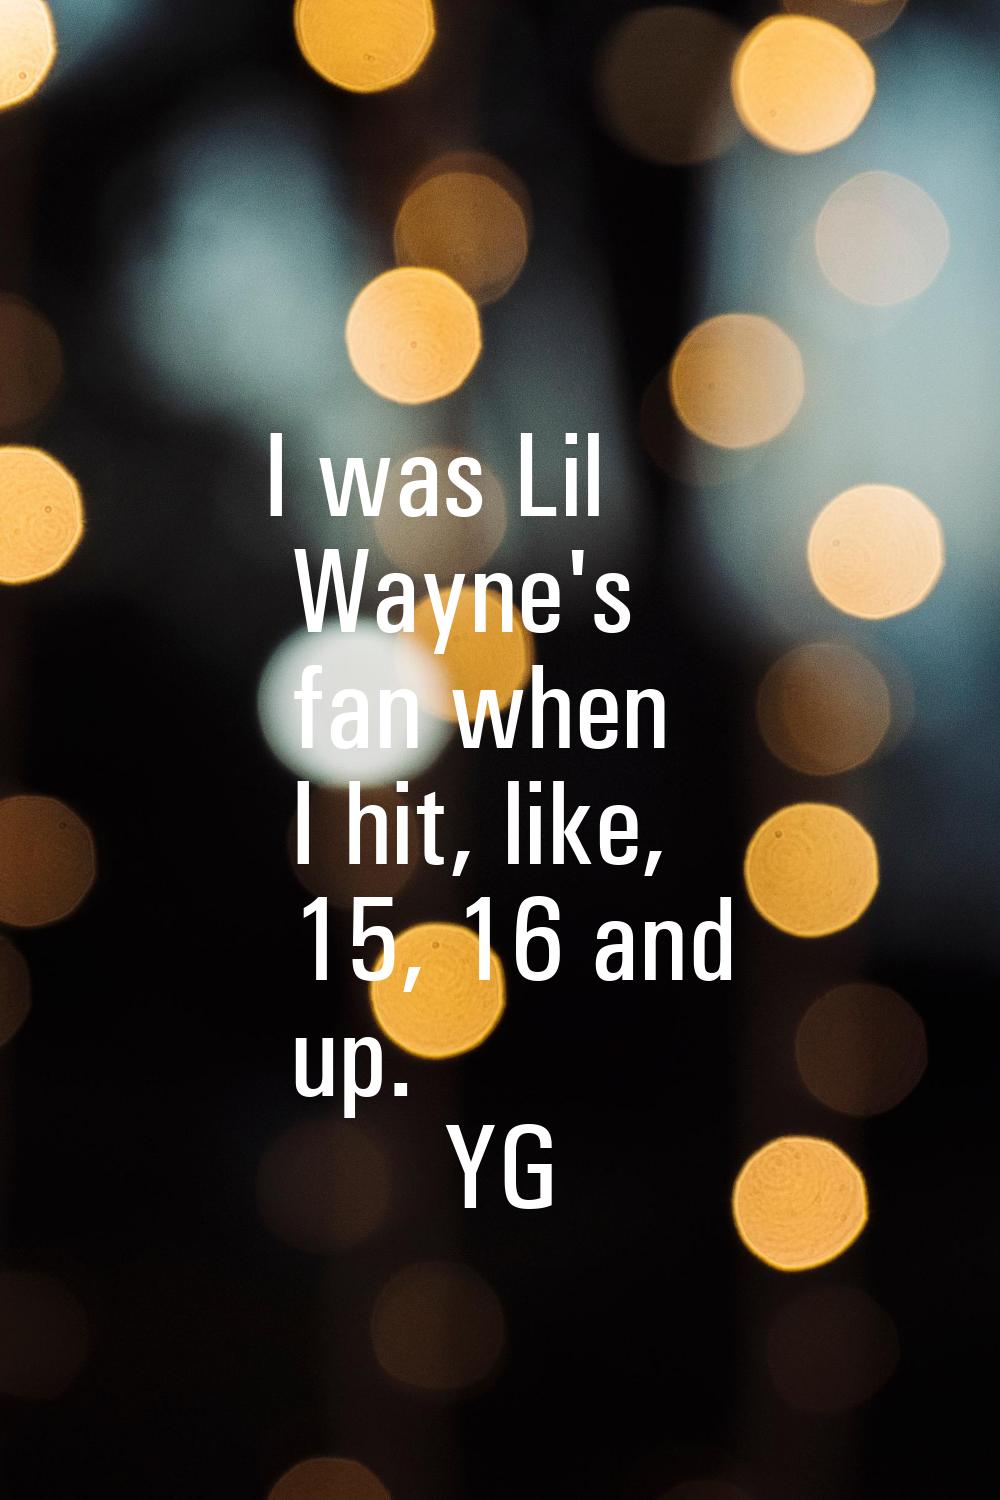 I was Lil Wayne's fan when I hit, like, 15, 16 and up.